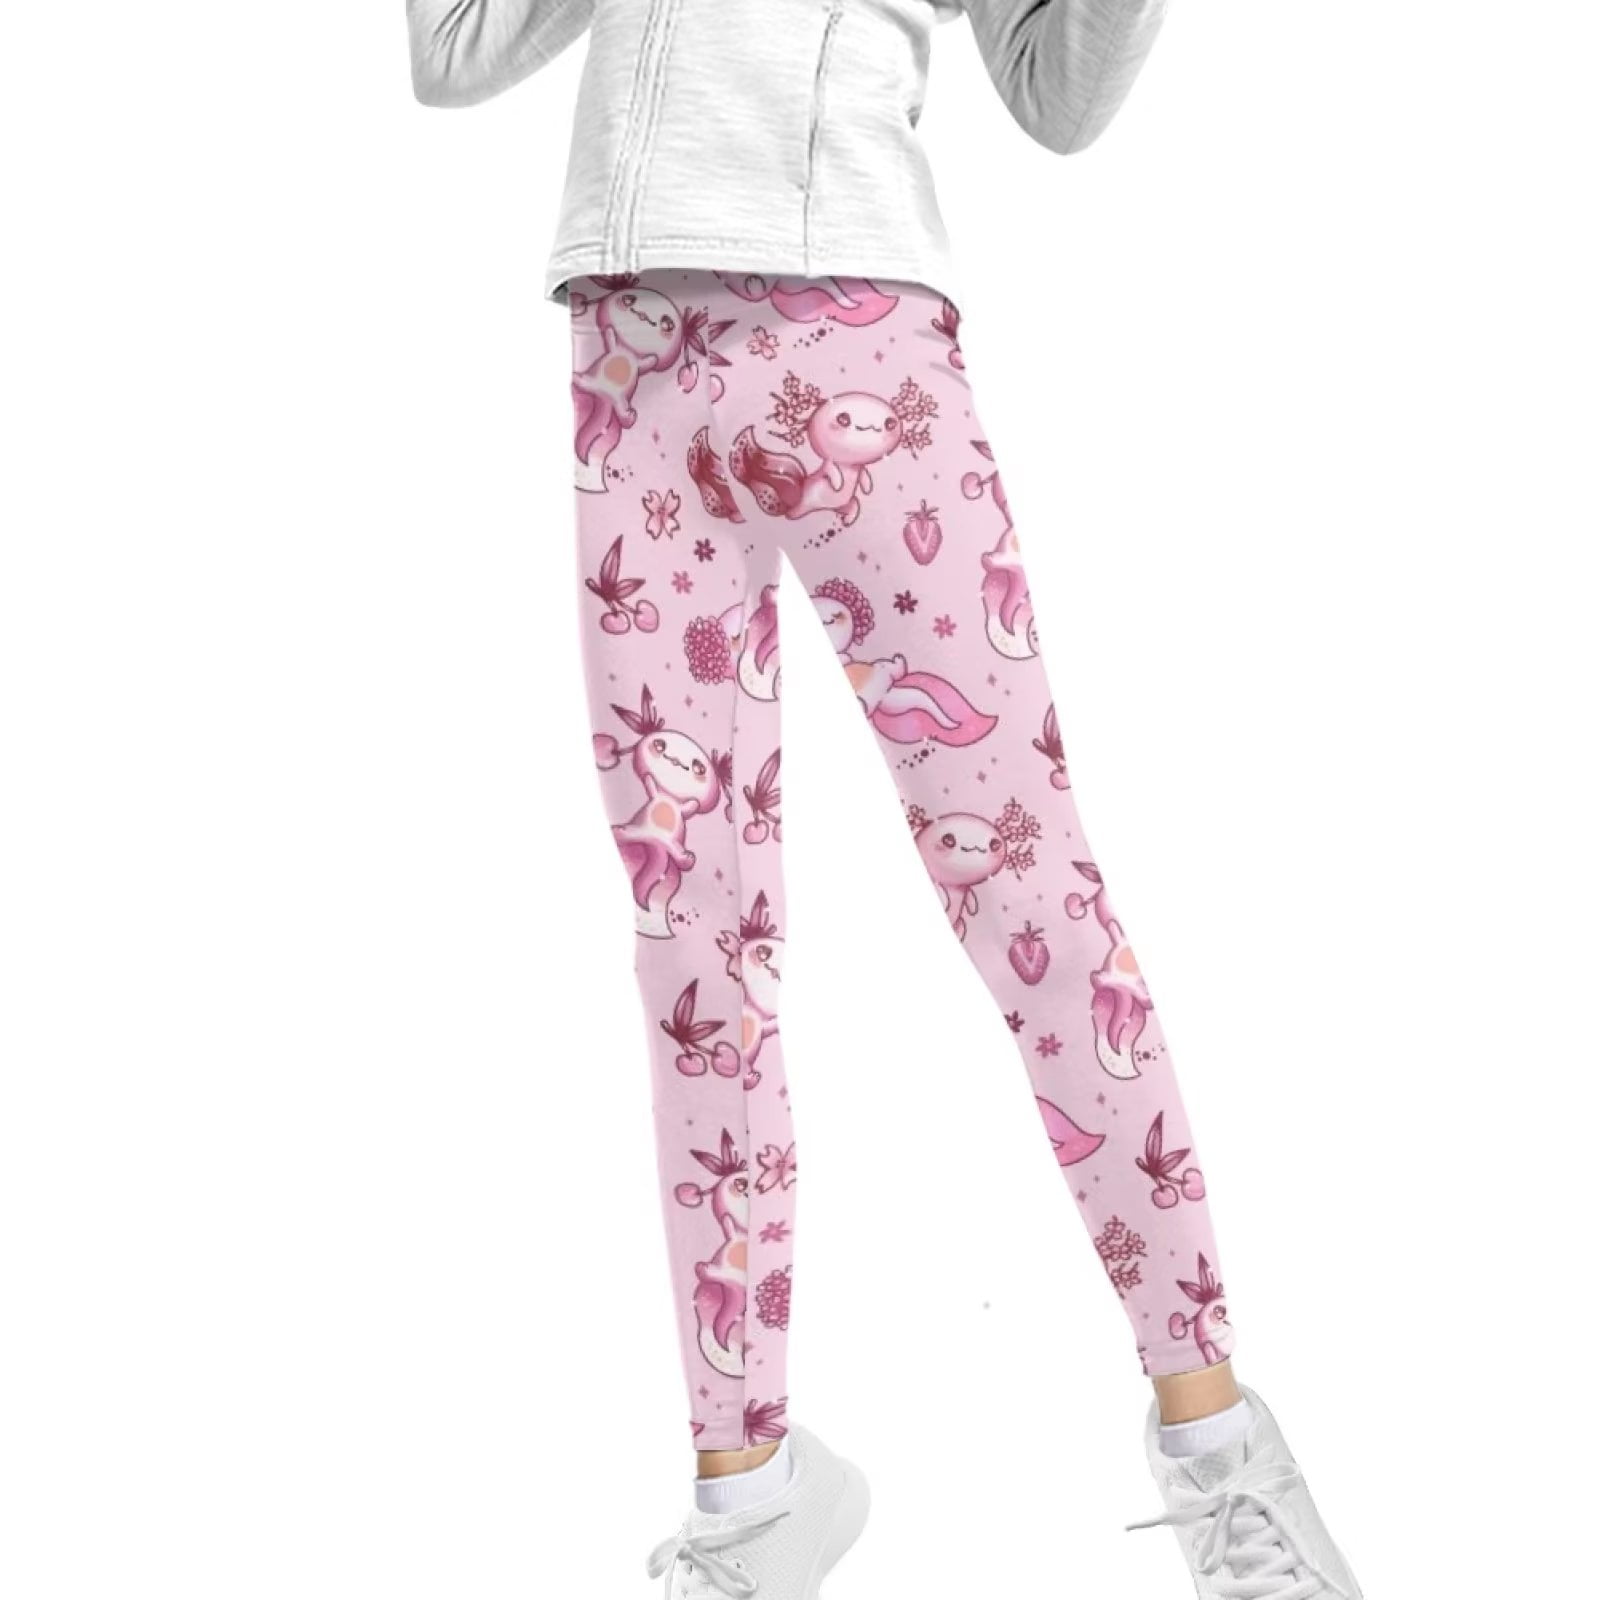 FKELYI Pink Floral Axolotl Kids Legging Size 12-13 Years Lightweight  Dancing Active Girls Tights Elastic Hoilday Yoga Pants High Waisted Cute 